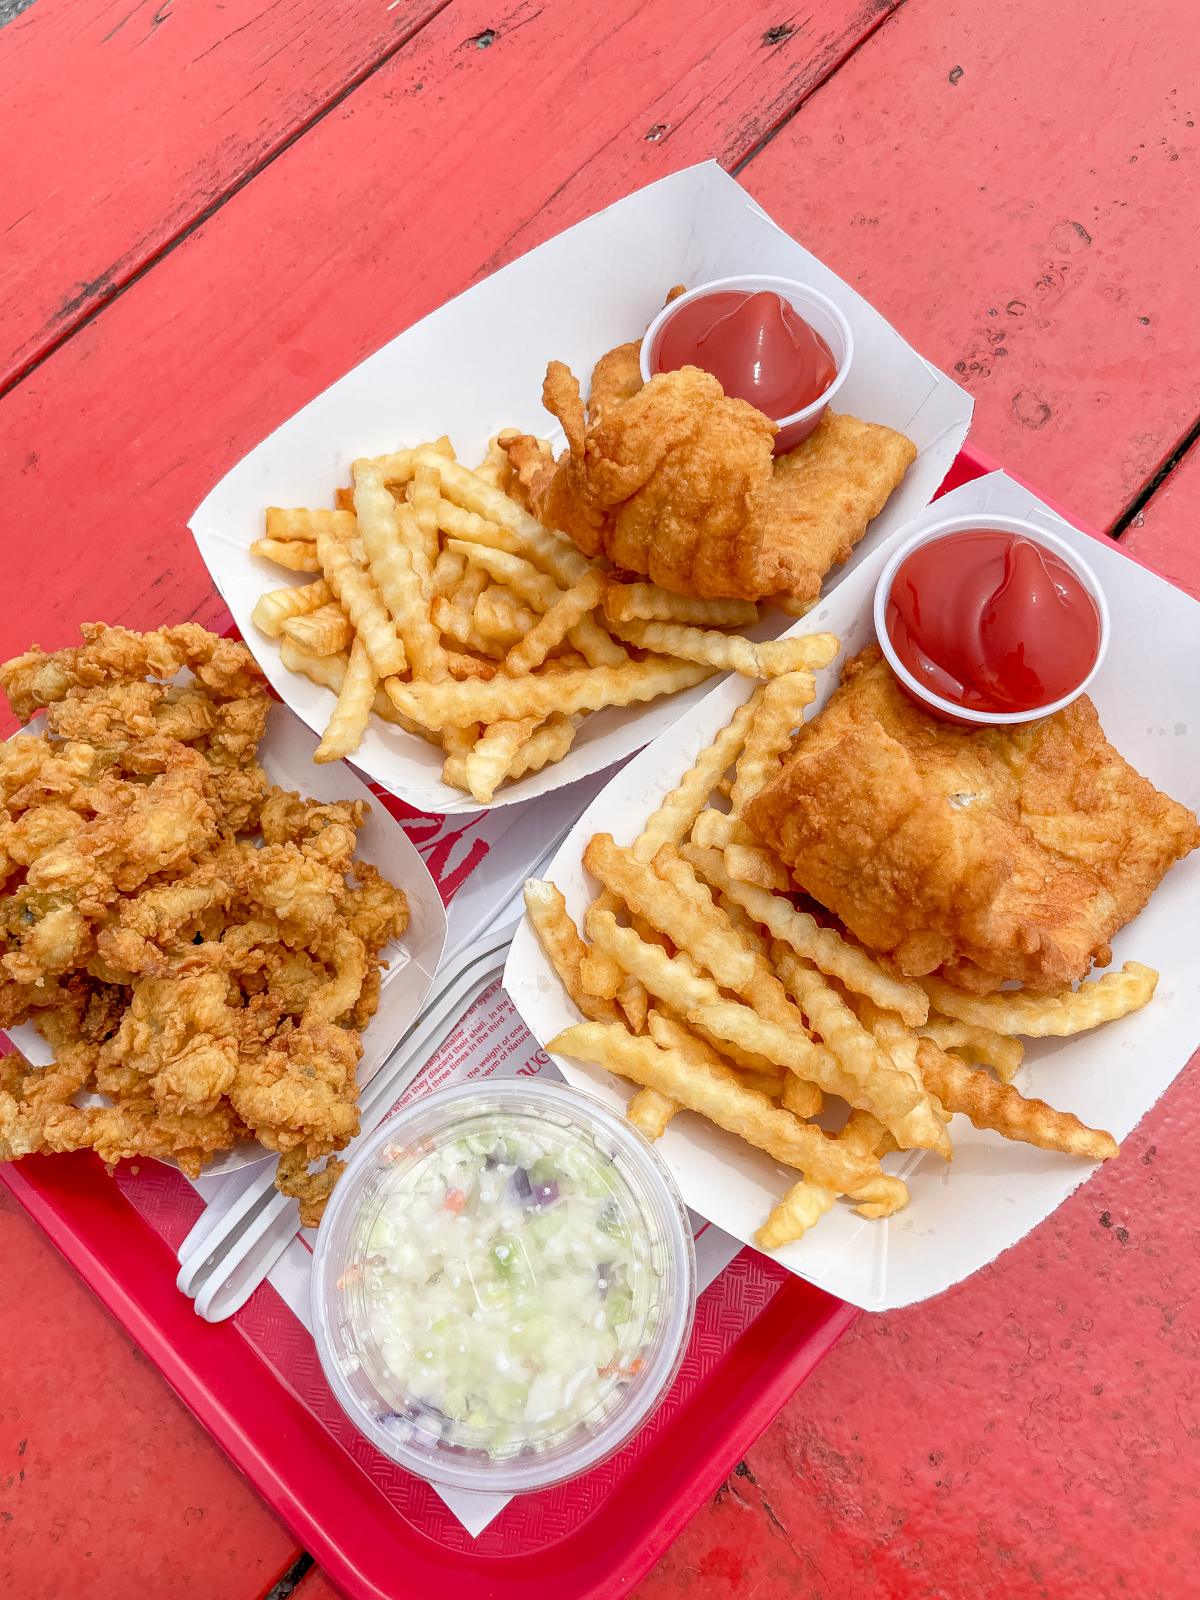 Fish and chips and fried clams at the Lobster Shack